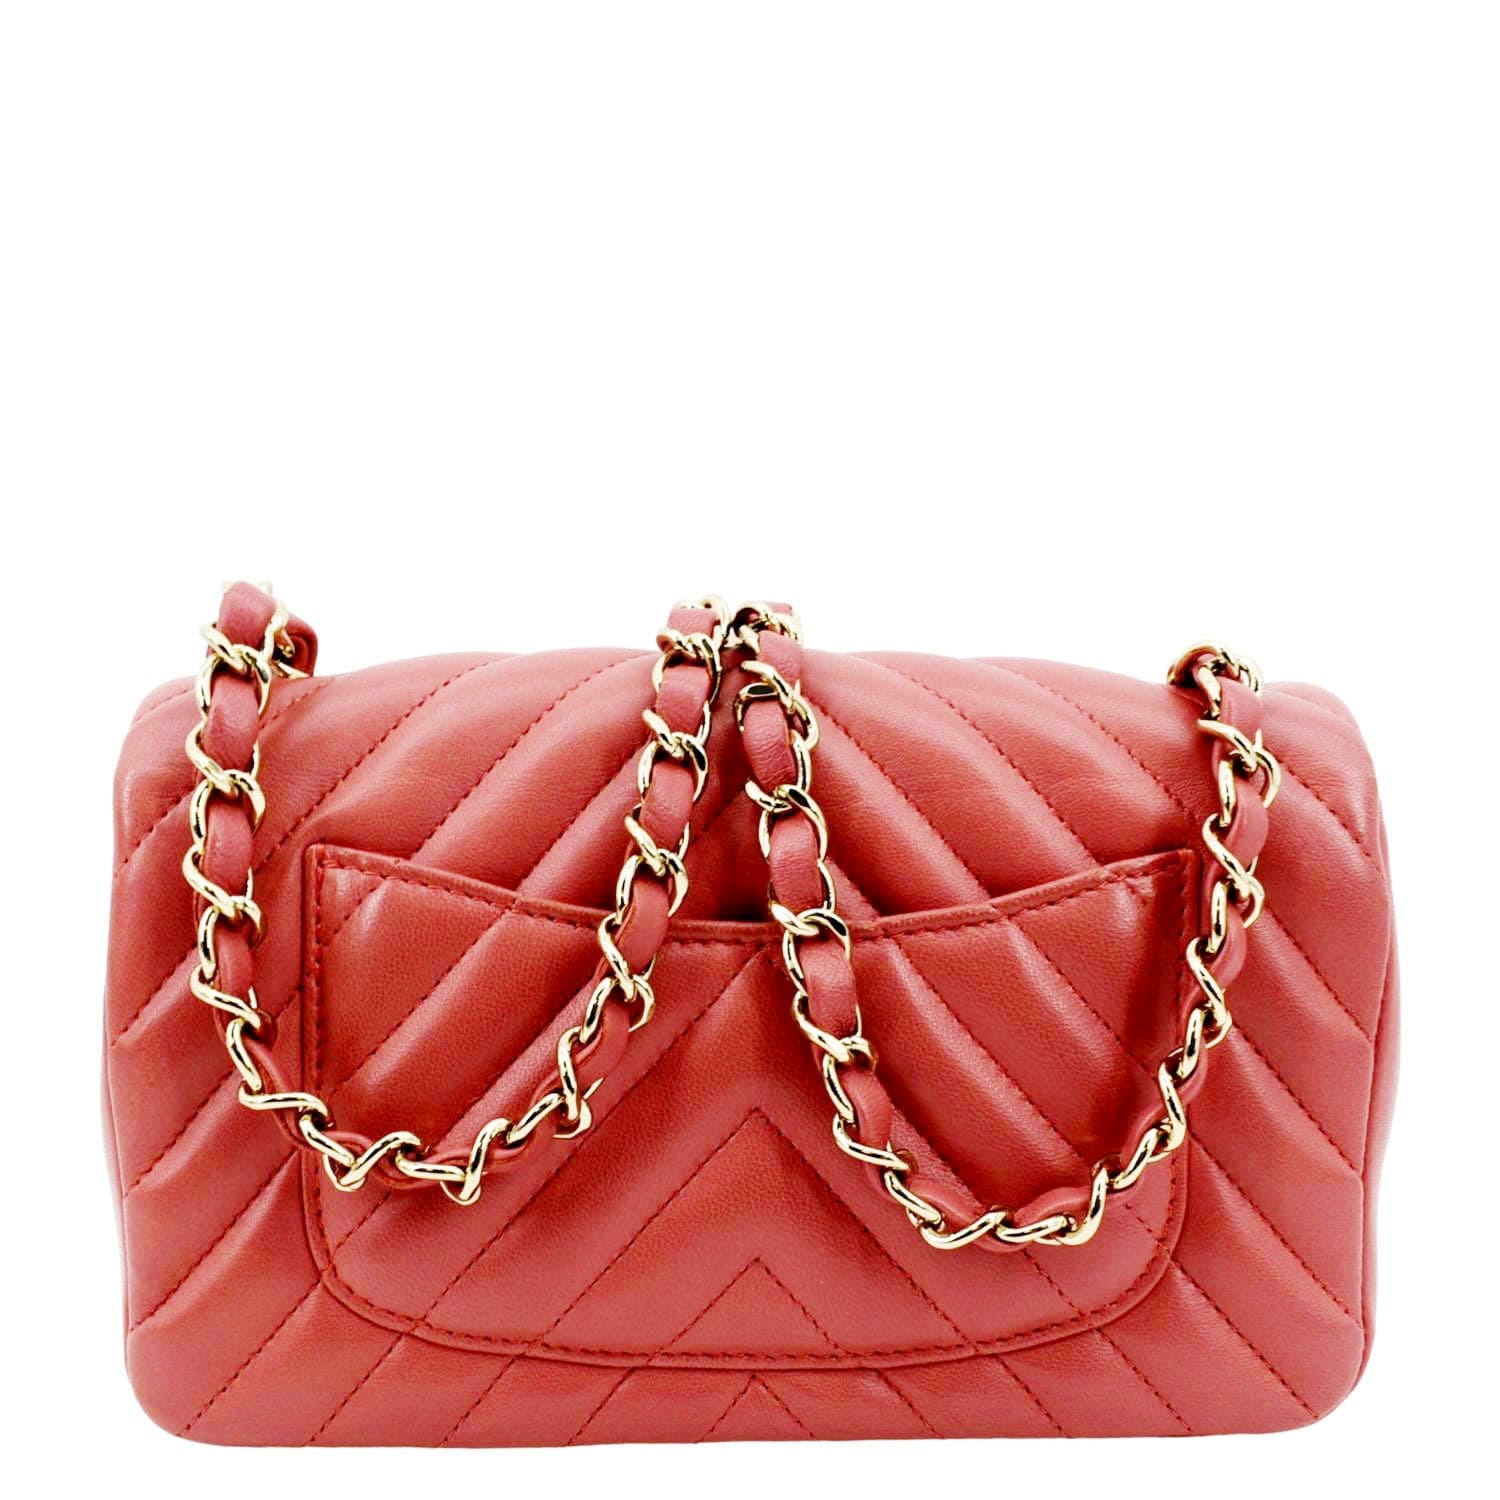 Chanel Rectangular Flap Mini Quilted Chevron Leather Shoulder Bag Red